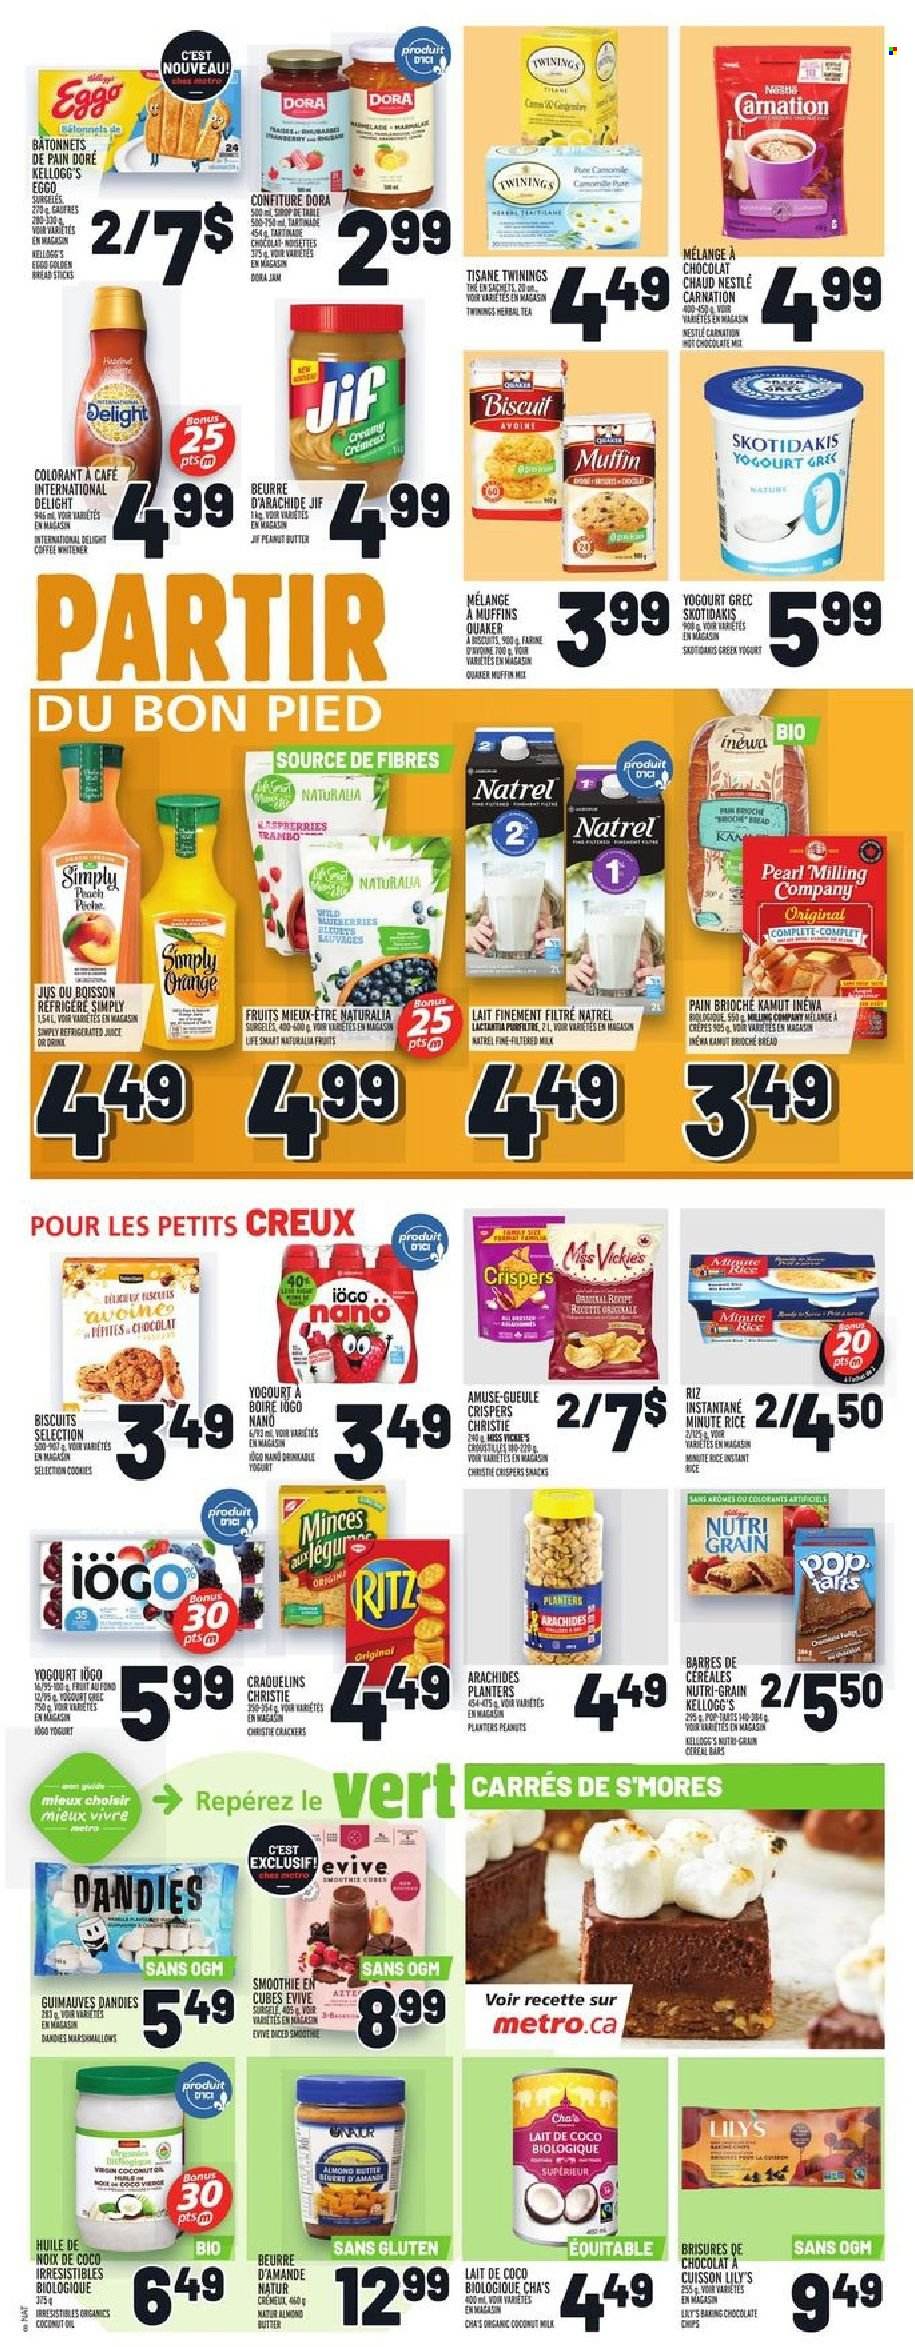 thumbnail - Metro Flyer - September 23, 2021 - September 29, 2021 - Sales products - brioche, muffin, Quaker, yoghurt, almond butter, cookies, chocolate, snack, crackers, Kellogg's, biscuit, Nutri-Grain, rice, fruit jam, peanut butter, Jif, Planters, smoothie, tea, herbal tea, Twinings, Nestlé. Page 10.